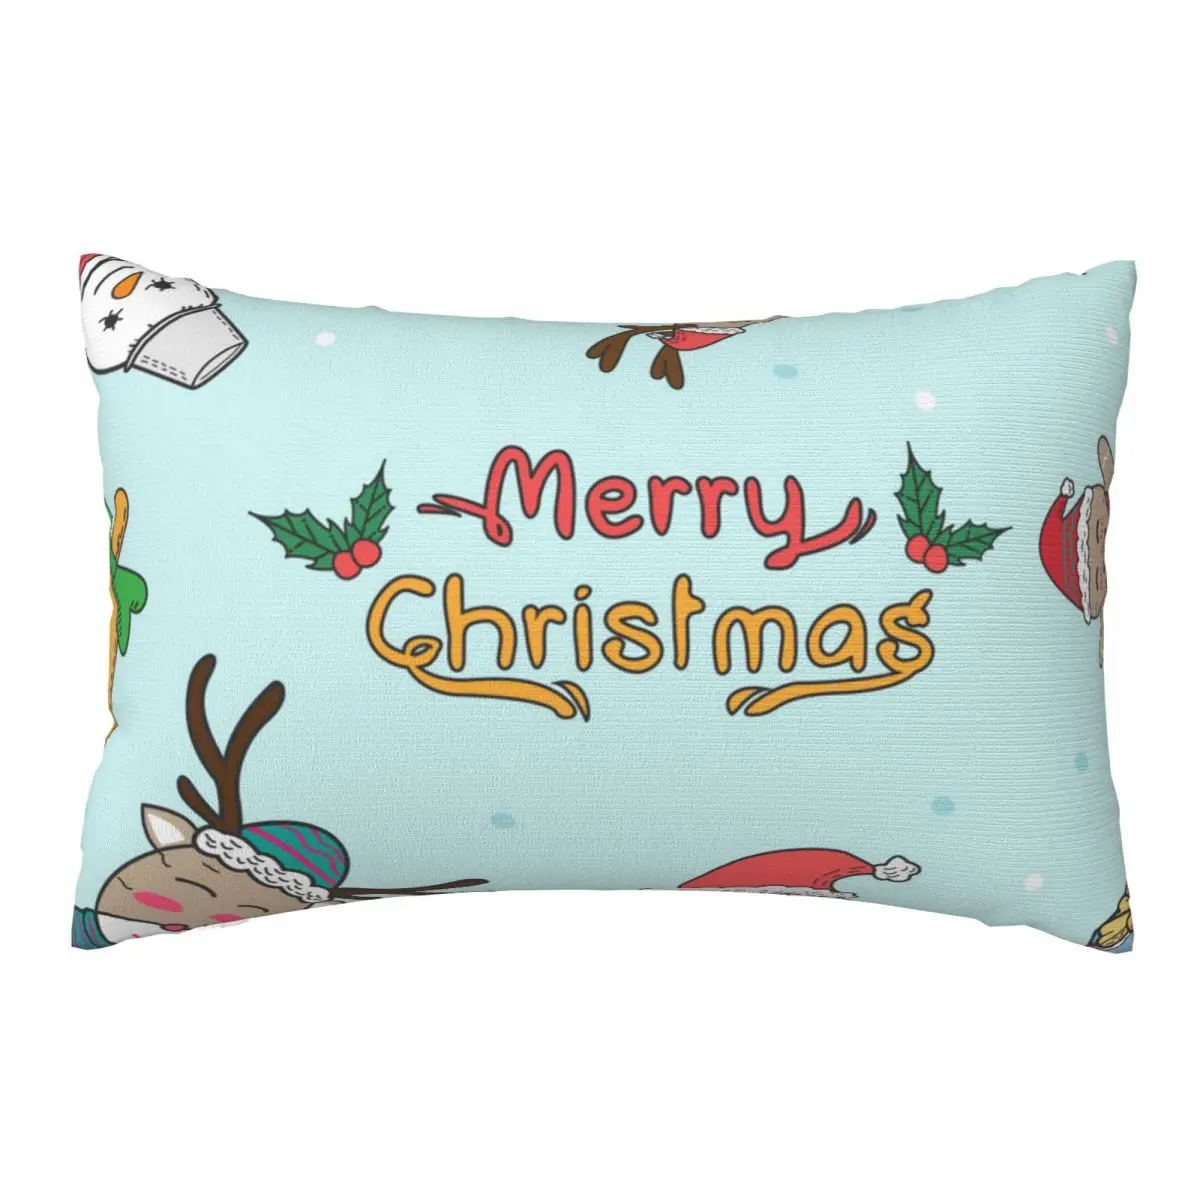 

Christmas Elements Cartoons Decorative Pillow Covers Throw Pillow Cover Home Pillows Shells Cushion Cover Zippered Pillowcase